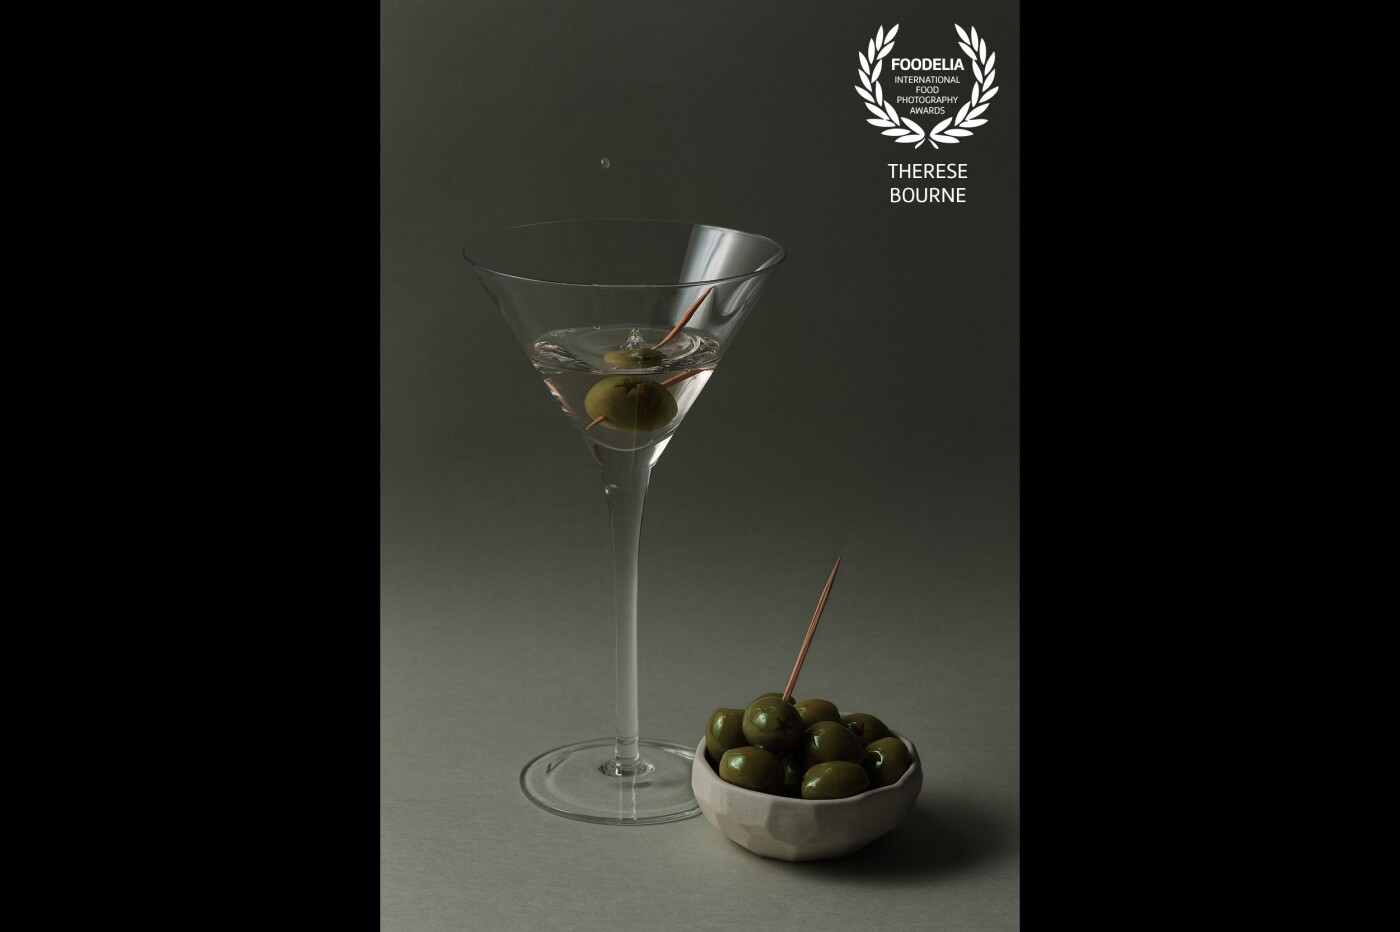 I re-created a still-life painting by artist Javier Mulio for a drinks photography challenge. It was both fun and challenging trying to recreate the mood and lighting. A nice surprise was capturing the tiny droplet suspended in mid-air. A case of art imitating life imitating art!